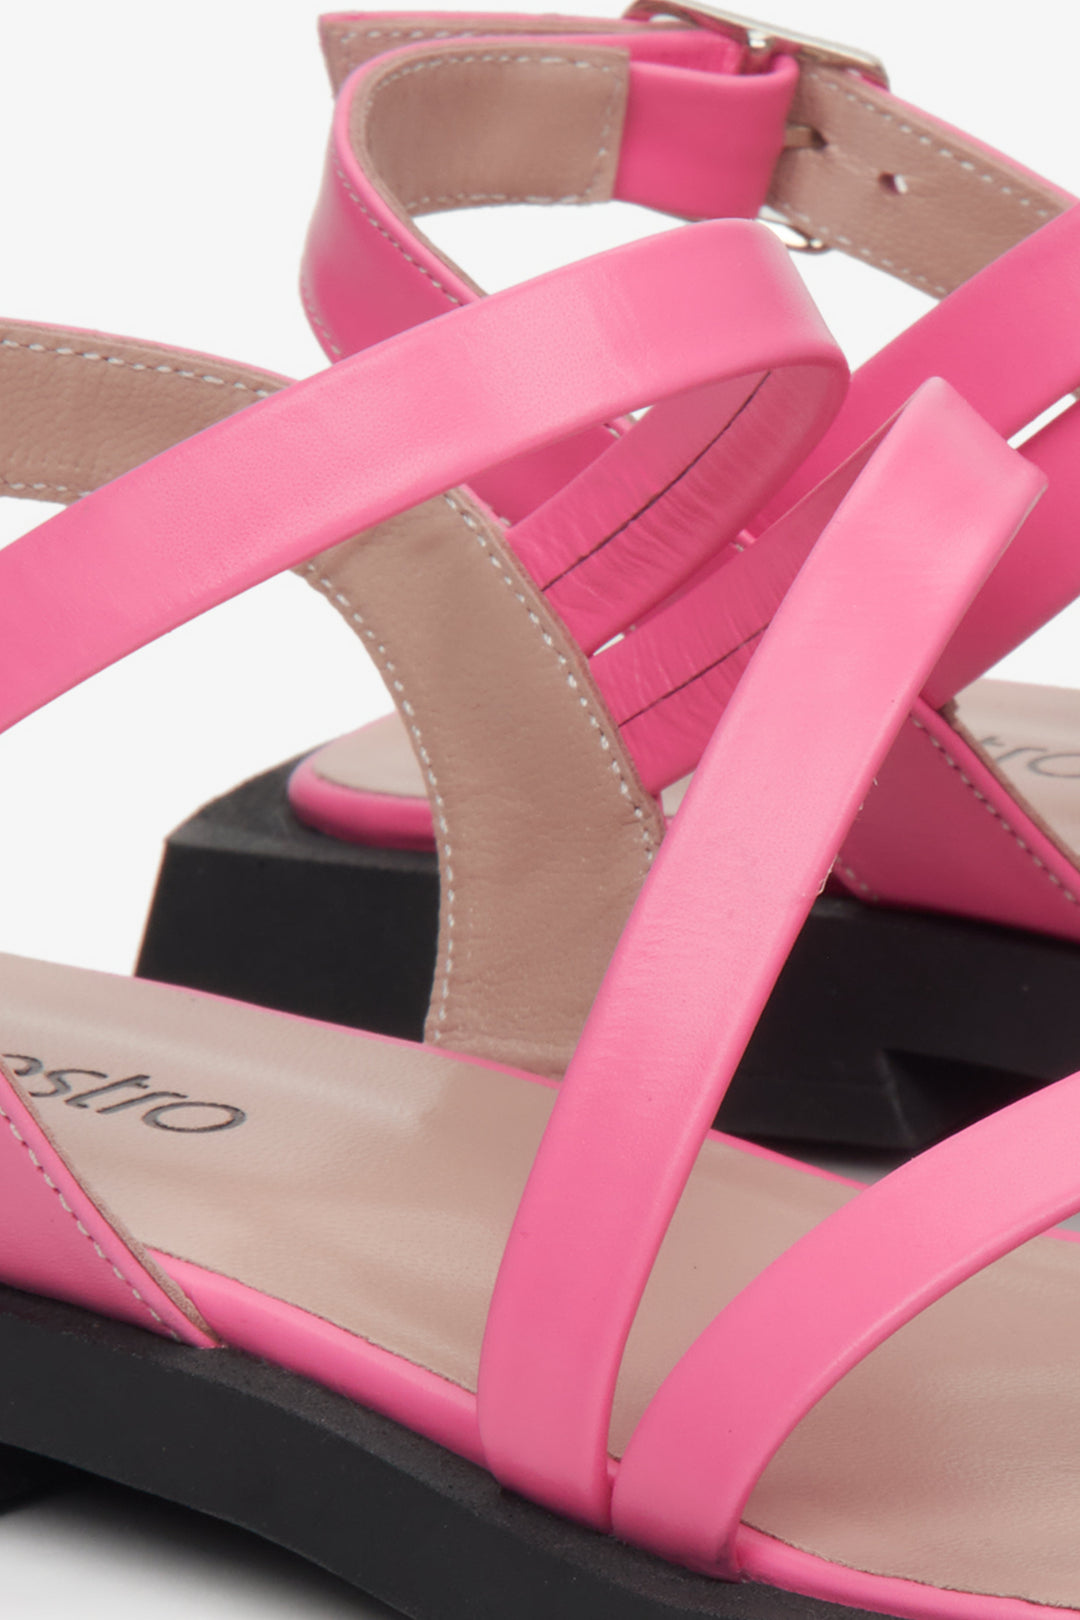 Leather, women's pink sandals by Estro with thin straps - presentation of the rear part of the footwear.